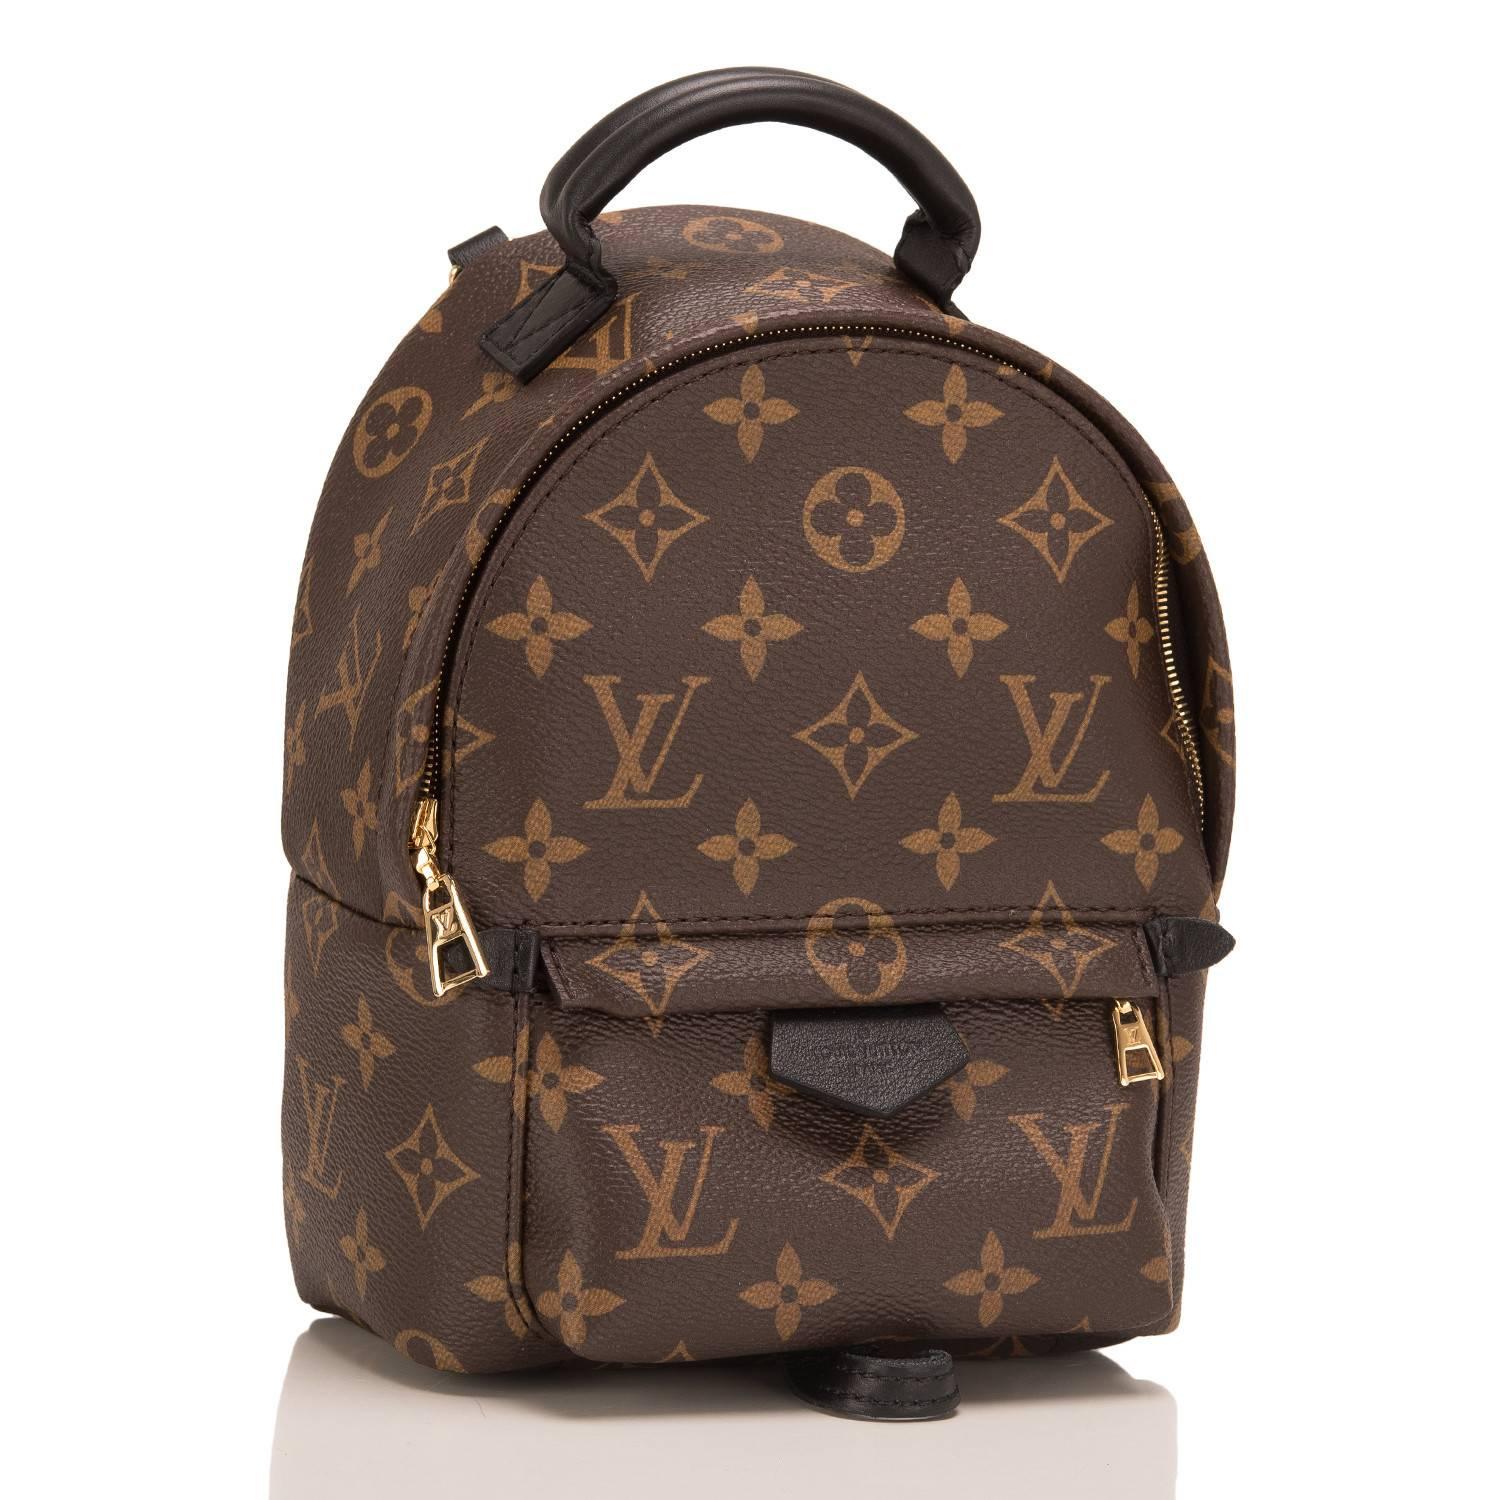 Louis Vuitton Monogram Palm Springs Backpack Mini designed by Nicholas Ghesquiere with golden brass hardware.

The monogram canvas has a soft calfskin trim with foam backing, leather scarf loop, two adjustable shoulder straps, nylon lining, golden